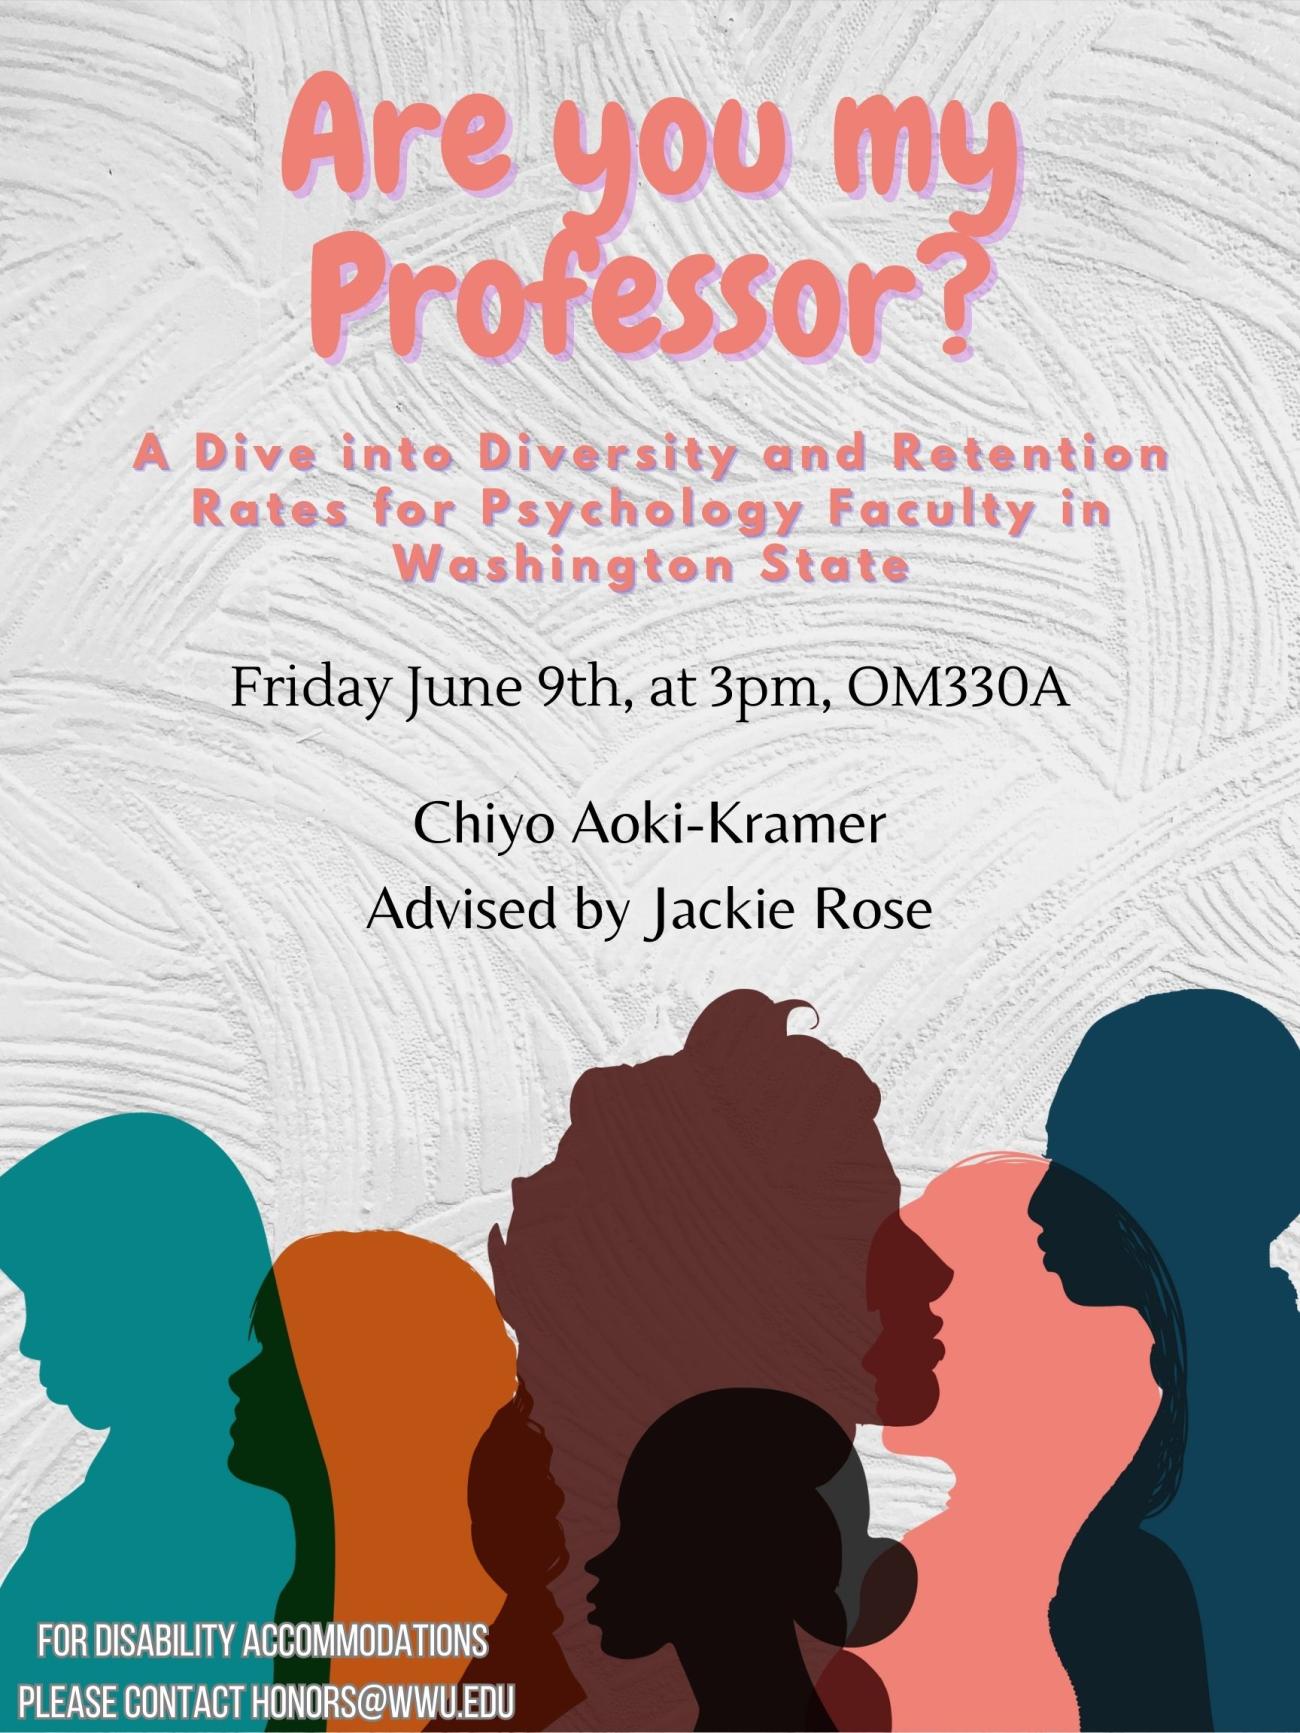 A poster with a white textured background and profile outlines of people shaded in different colors overlapping each other. The text reads "Are you my professor? A Dive into Diversity and Retention Rates for Psychology Faculty in Washington State. Friday June 9th, at 3pm, OM330A. Chiyo Aoki-Kramer Advised by Jackie Rose. For disability accommodations please contact honors@wwu.edu".